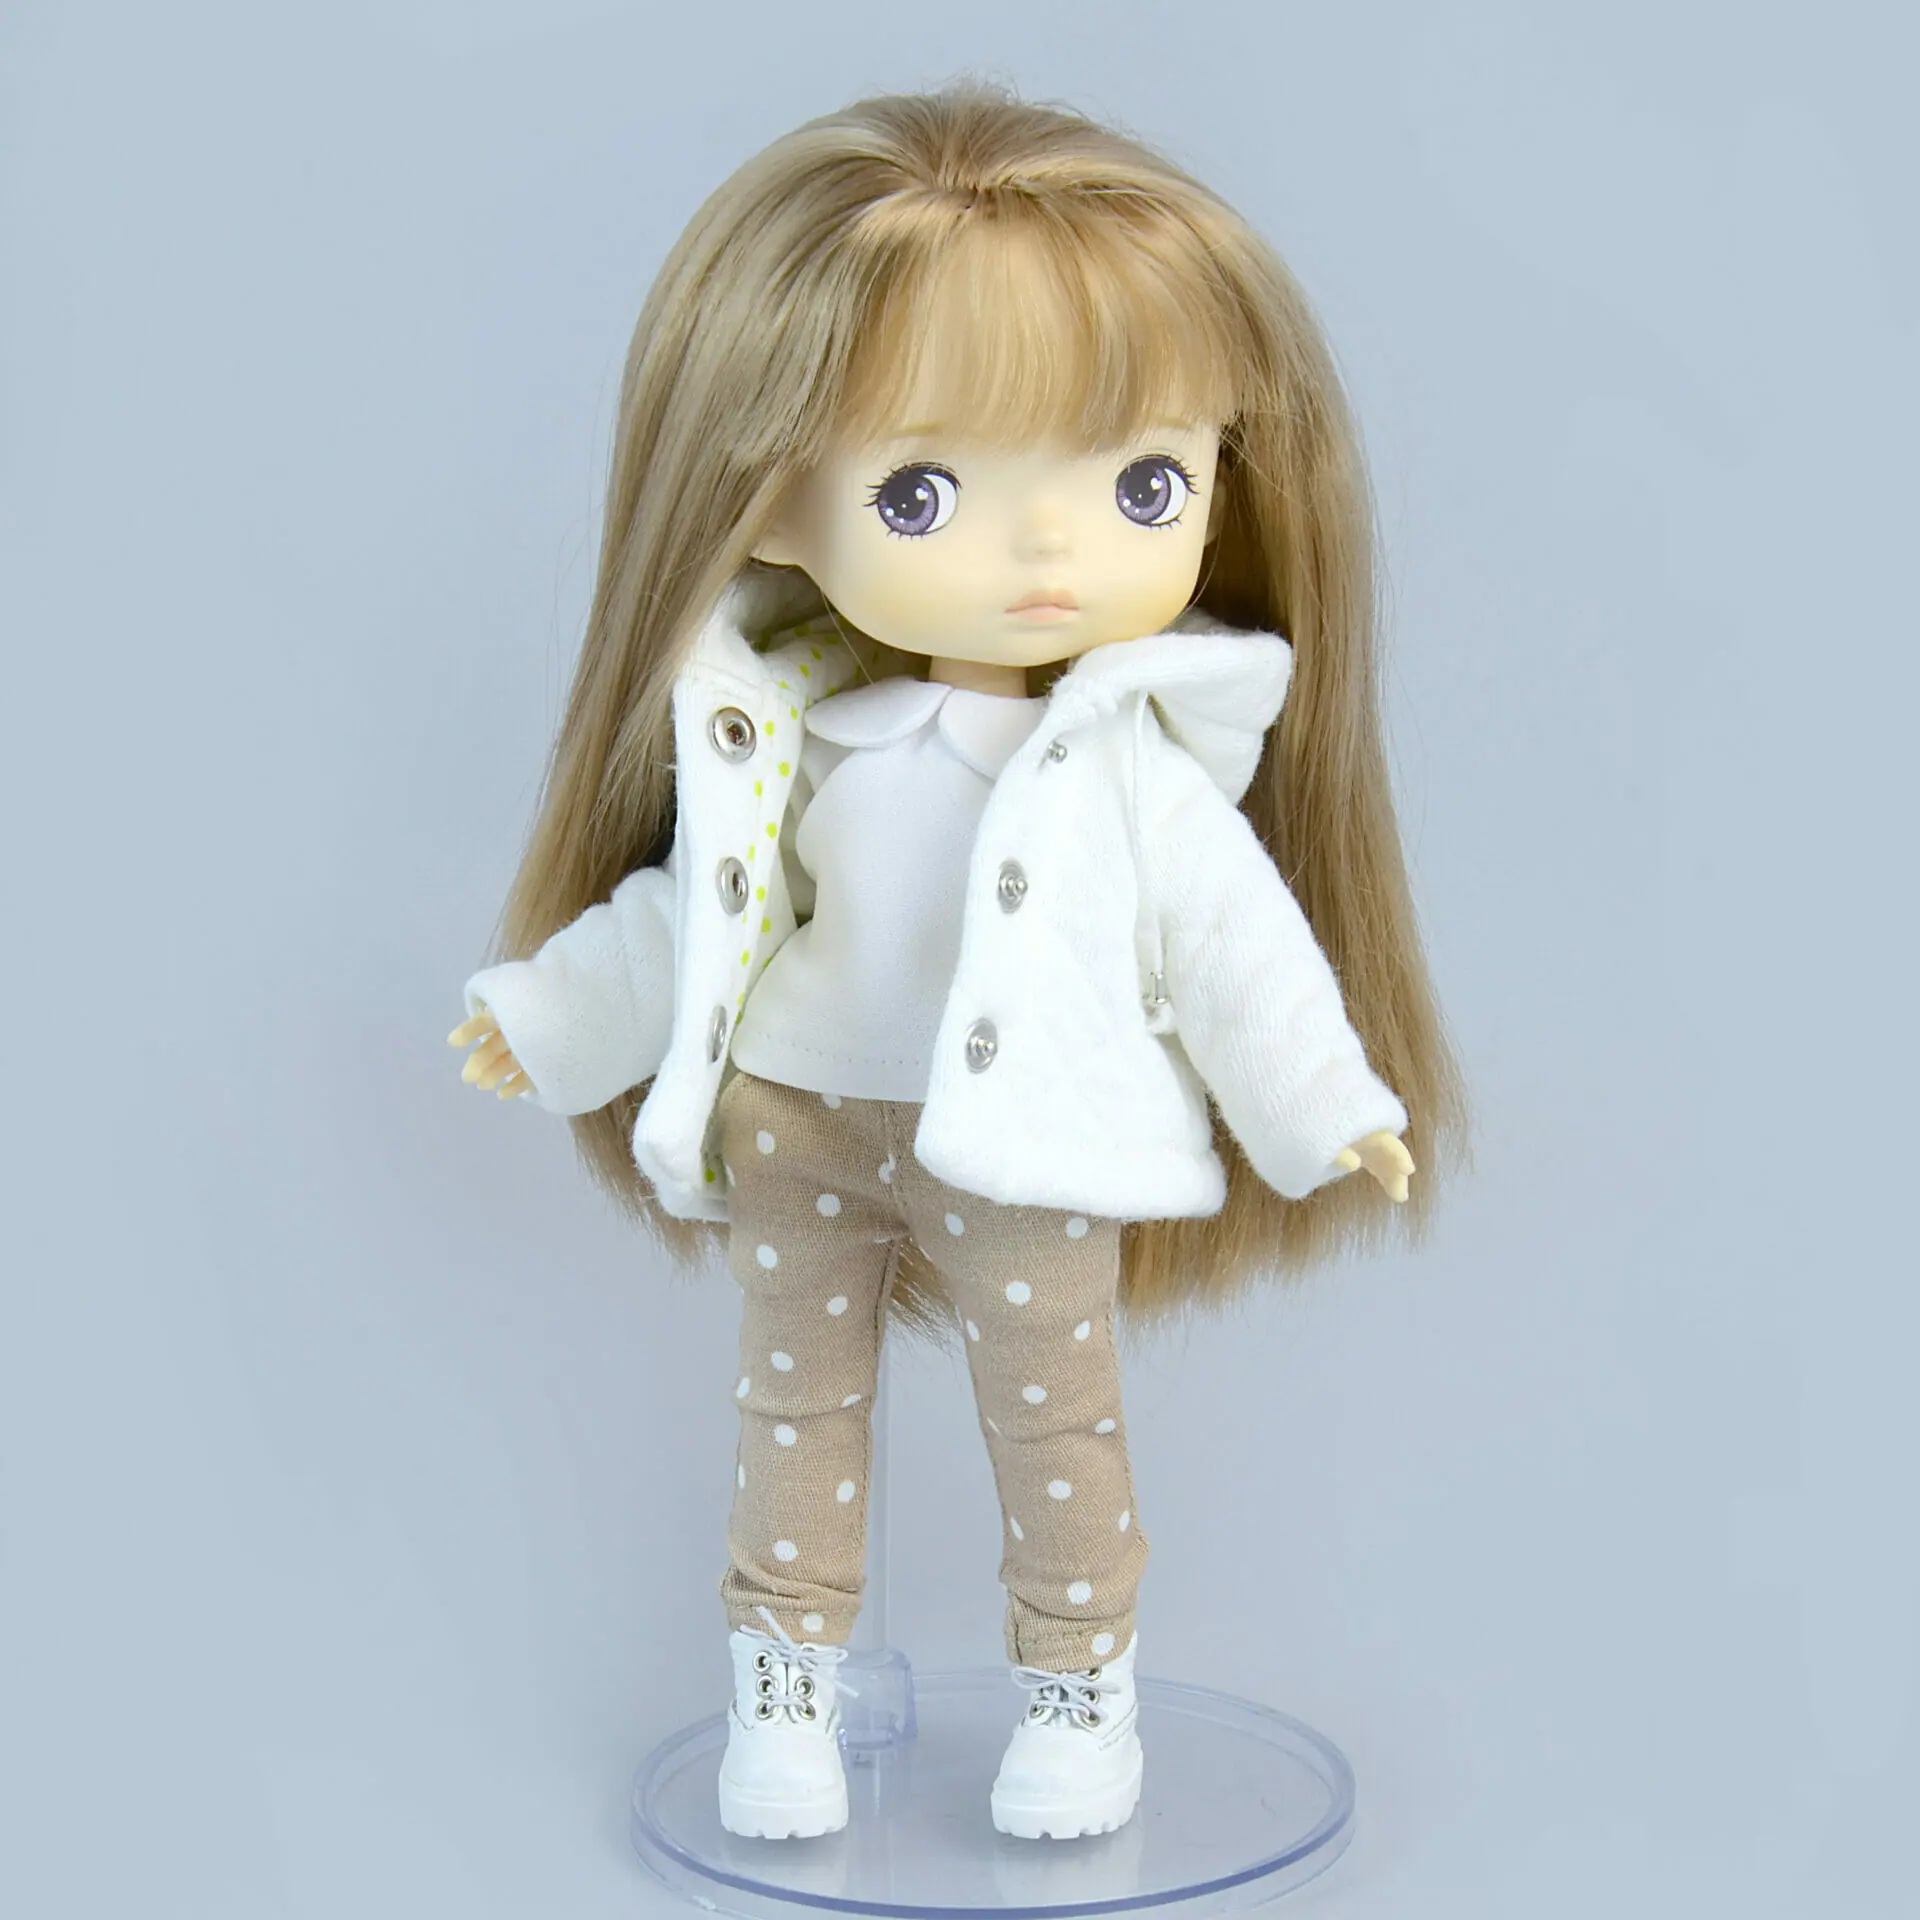 Outfit for Xiaomi Monst, Holala dolls (3 items)